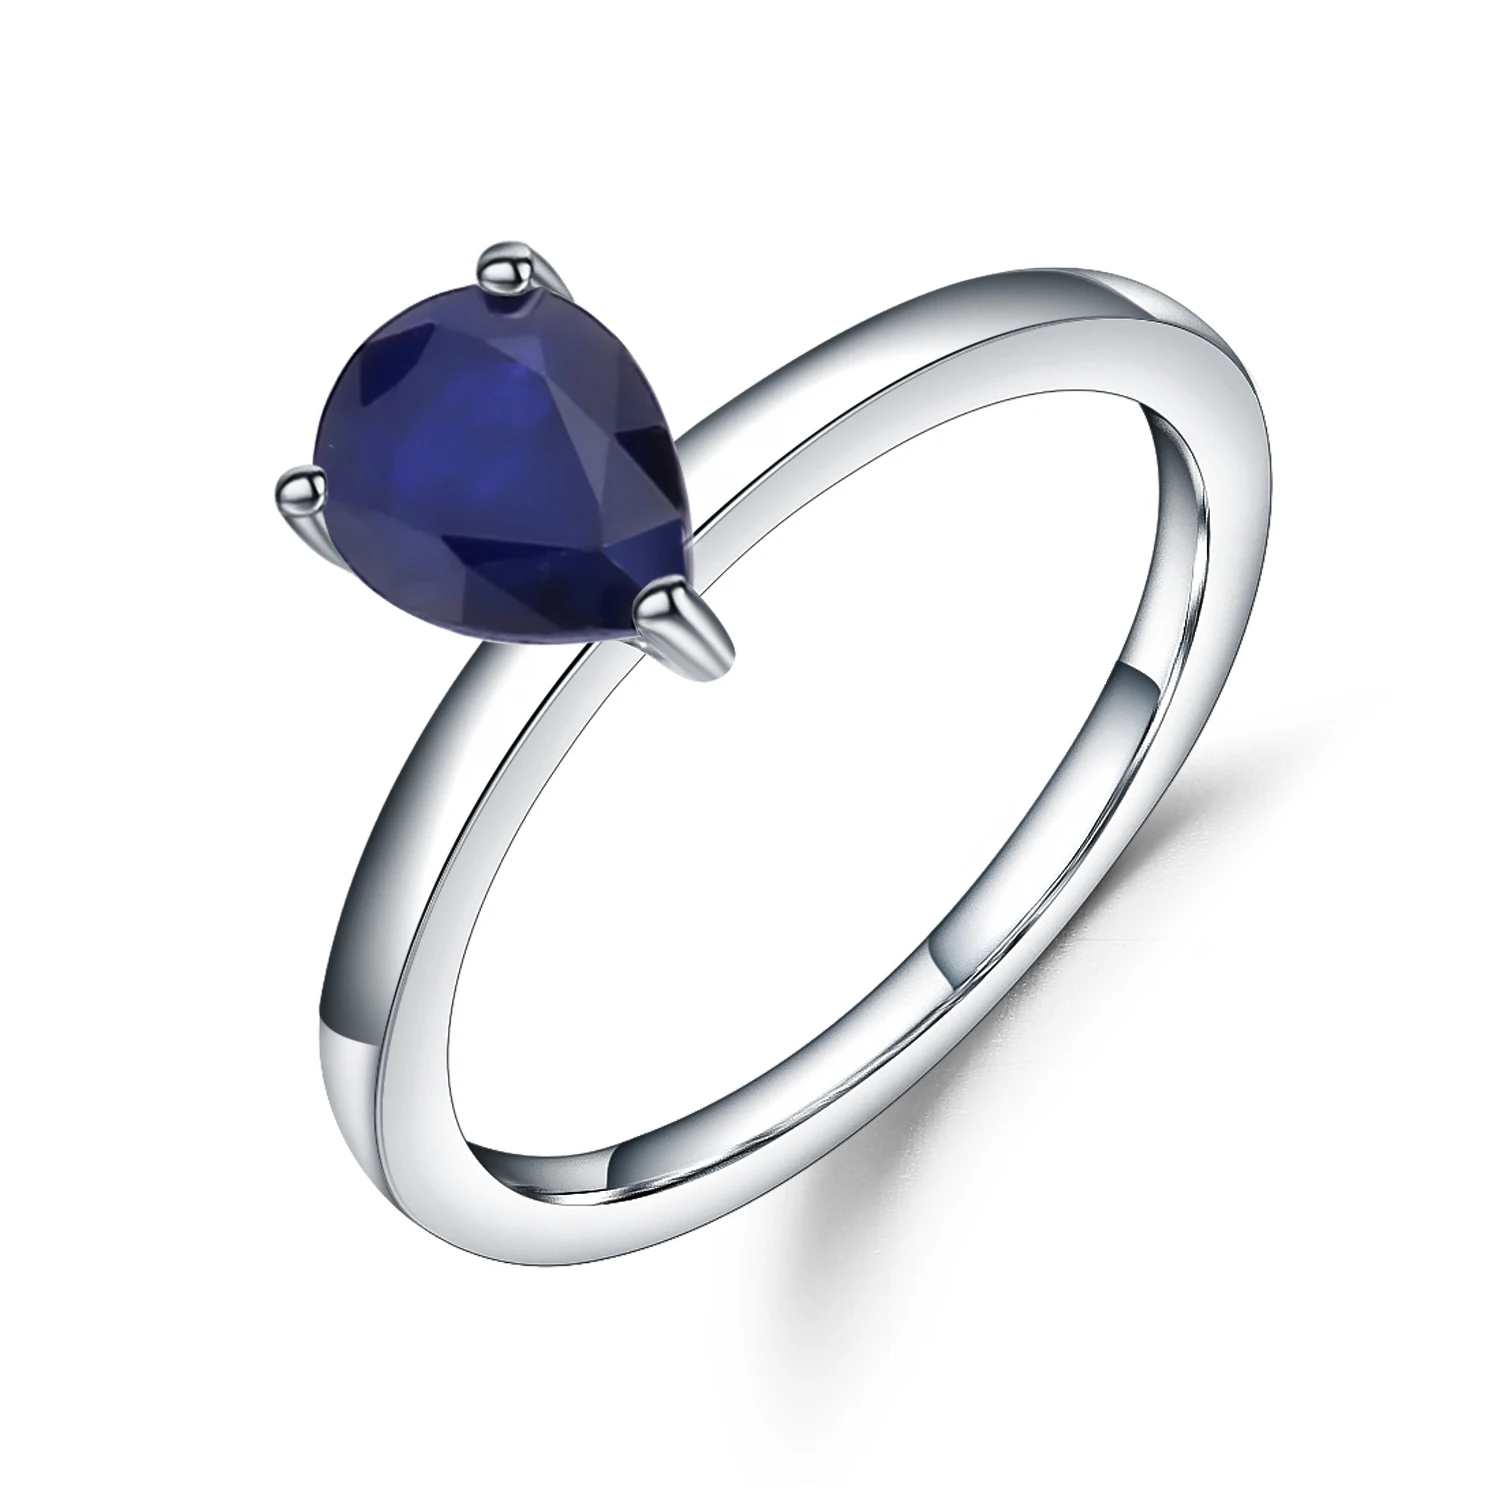 

Abiding Natural Blue Sapphire Water Drop Gemstone Wedding Rings Women Fashion Promise Engagement 925 Sterling Silver Ring